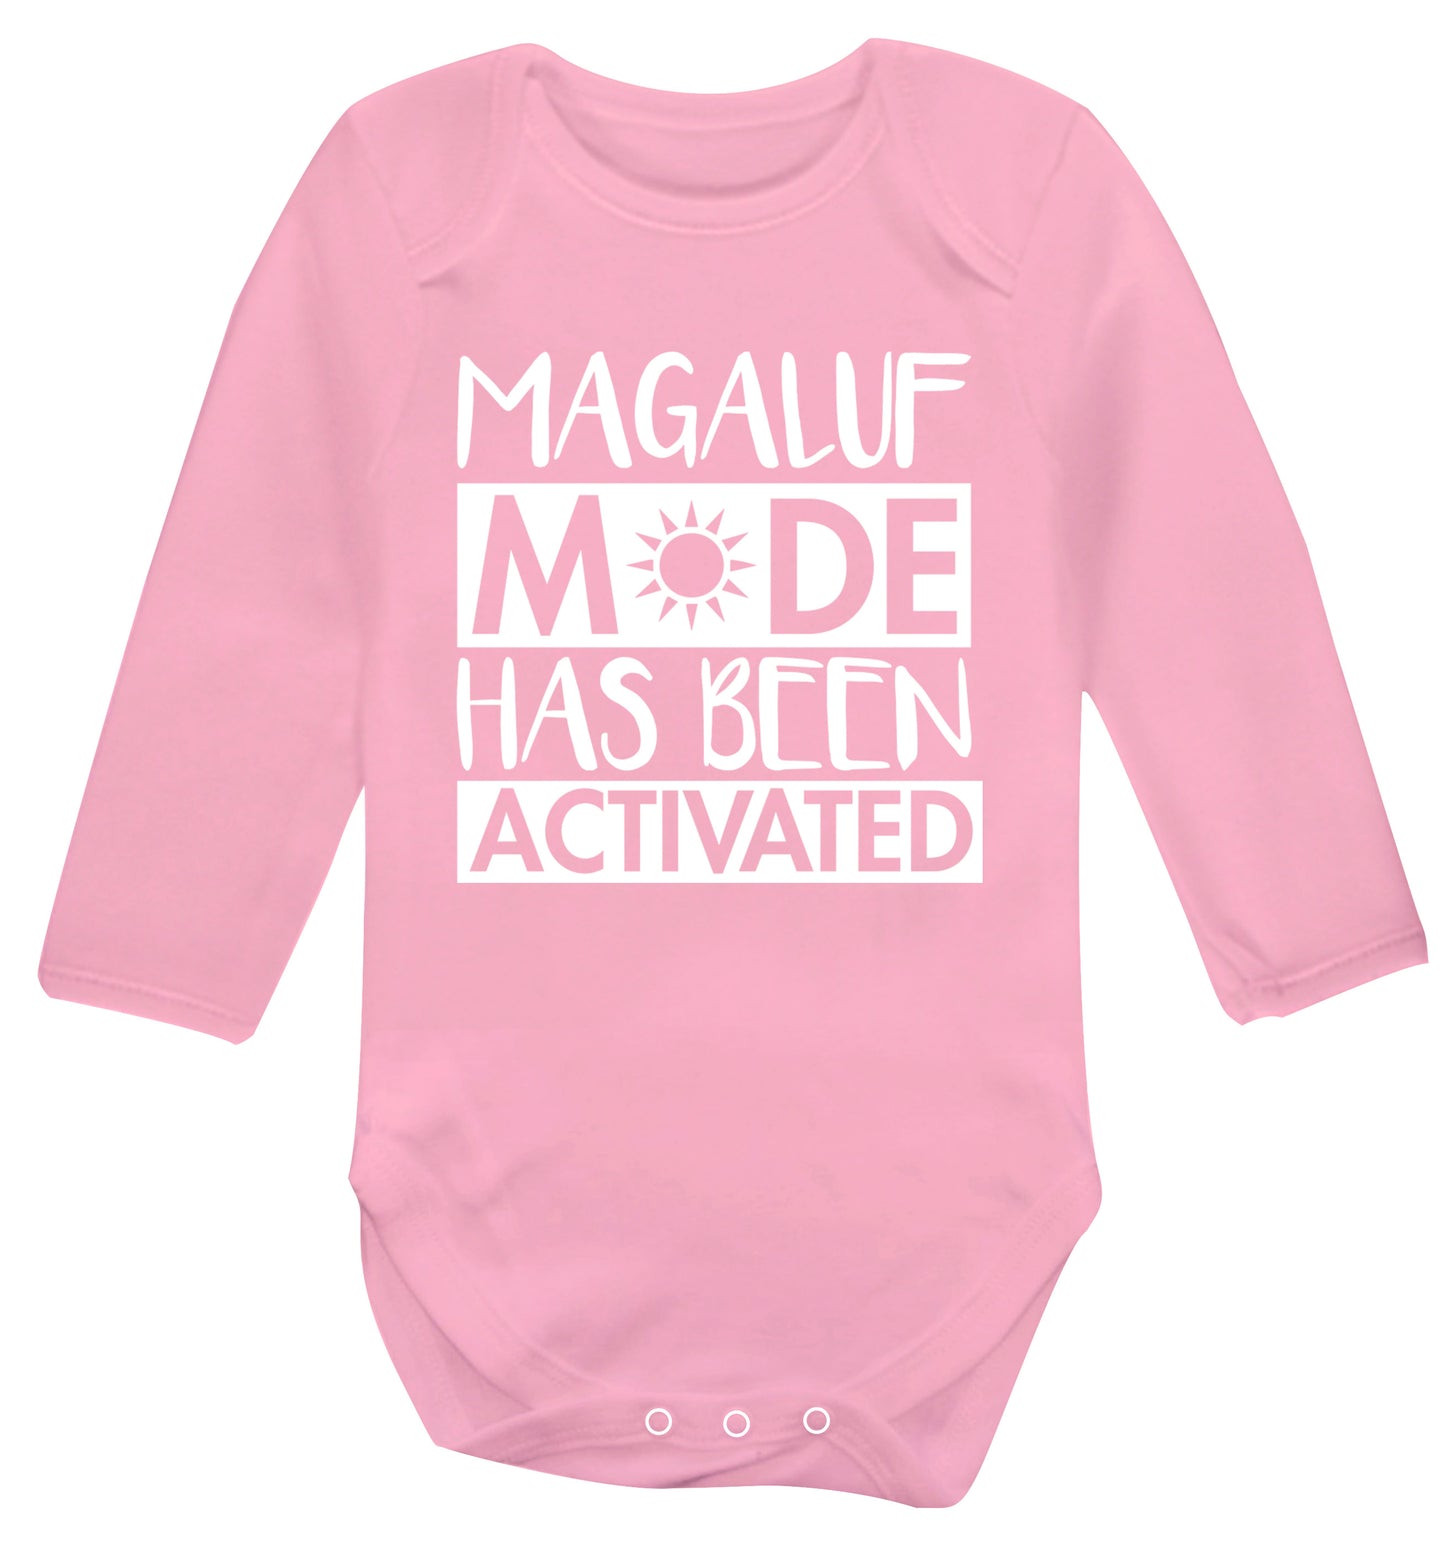 Magaluf mode has been activated Baby Vest long sleeved pale pink 6-12 months